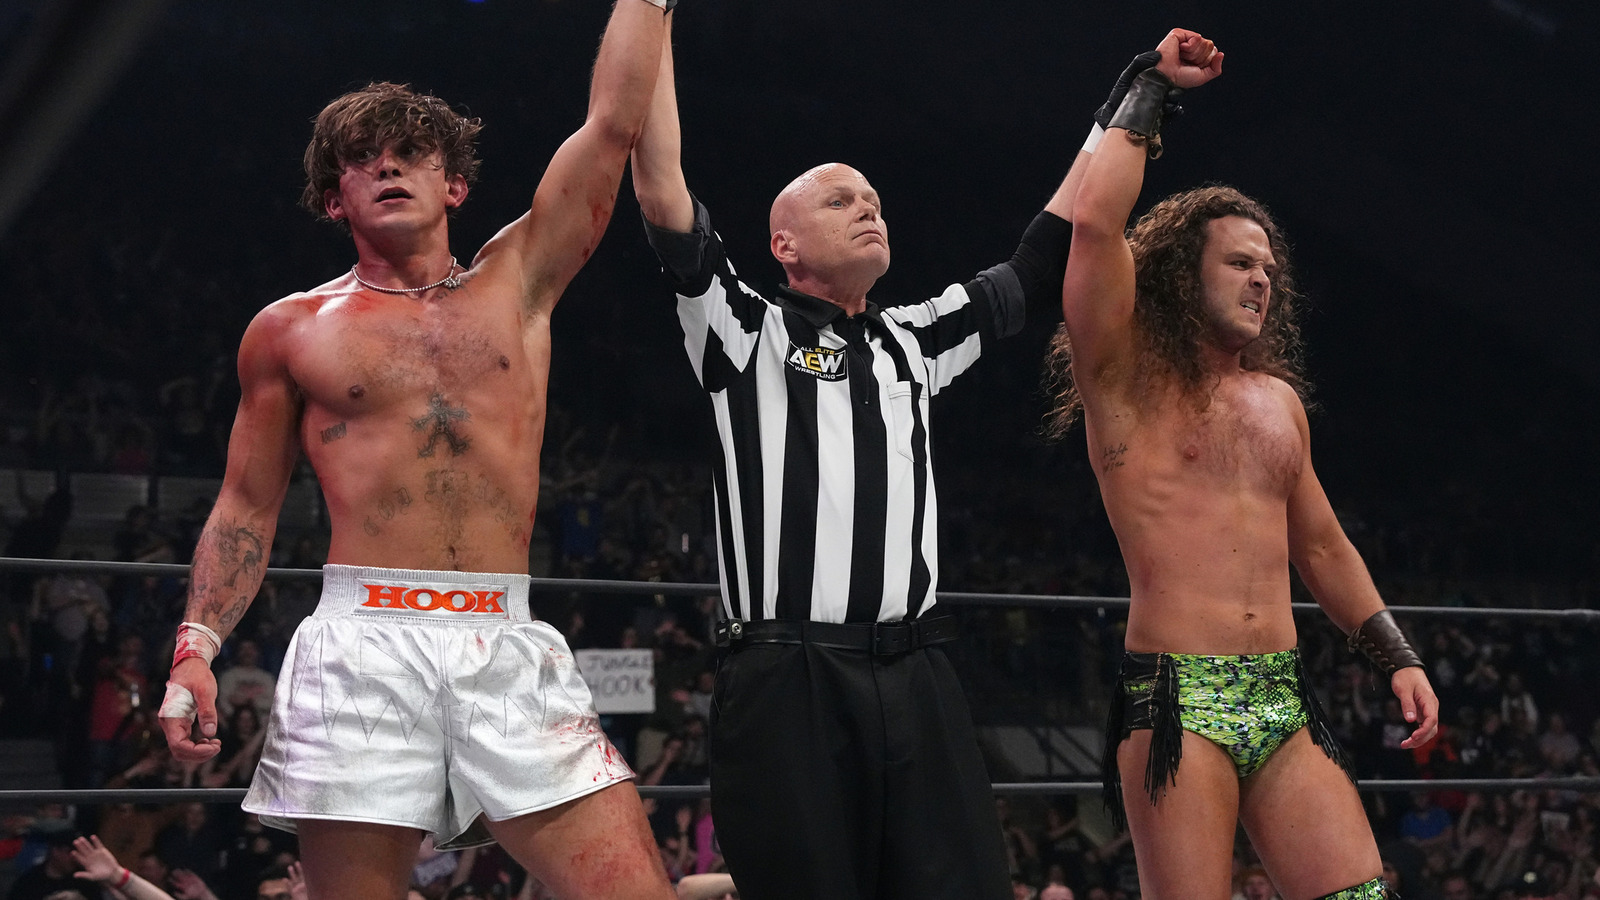 Jungle Boy Announces ‘The Summer Of JungleHOOK Is Upon Us’ Following AEW Dynamite Win – Wrestling Inc.